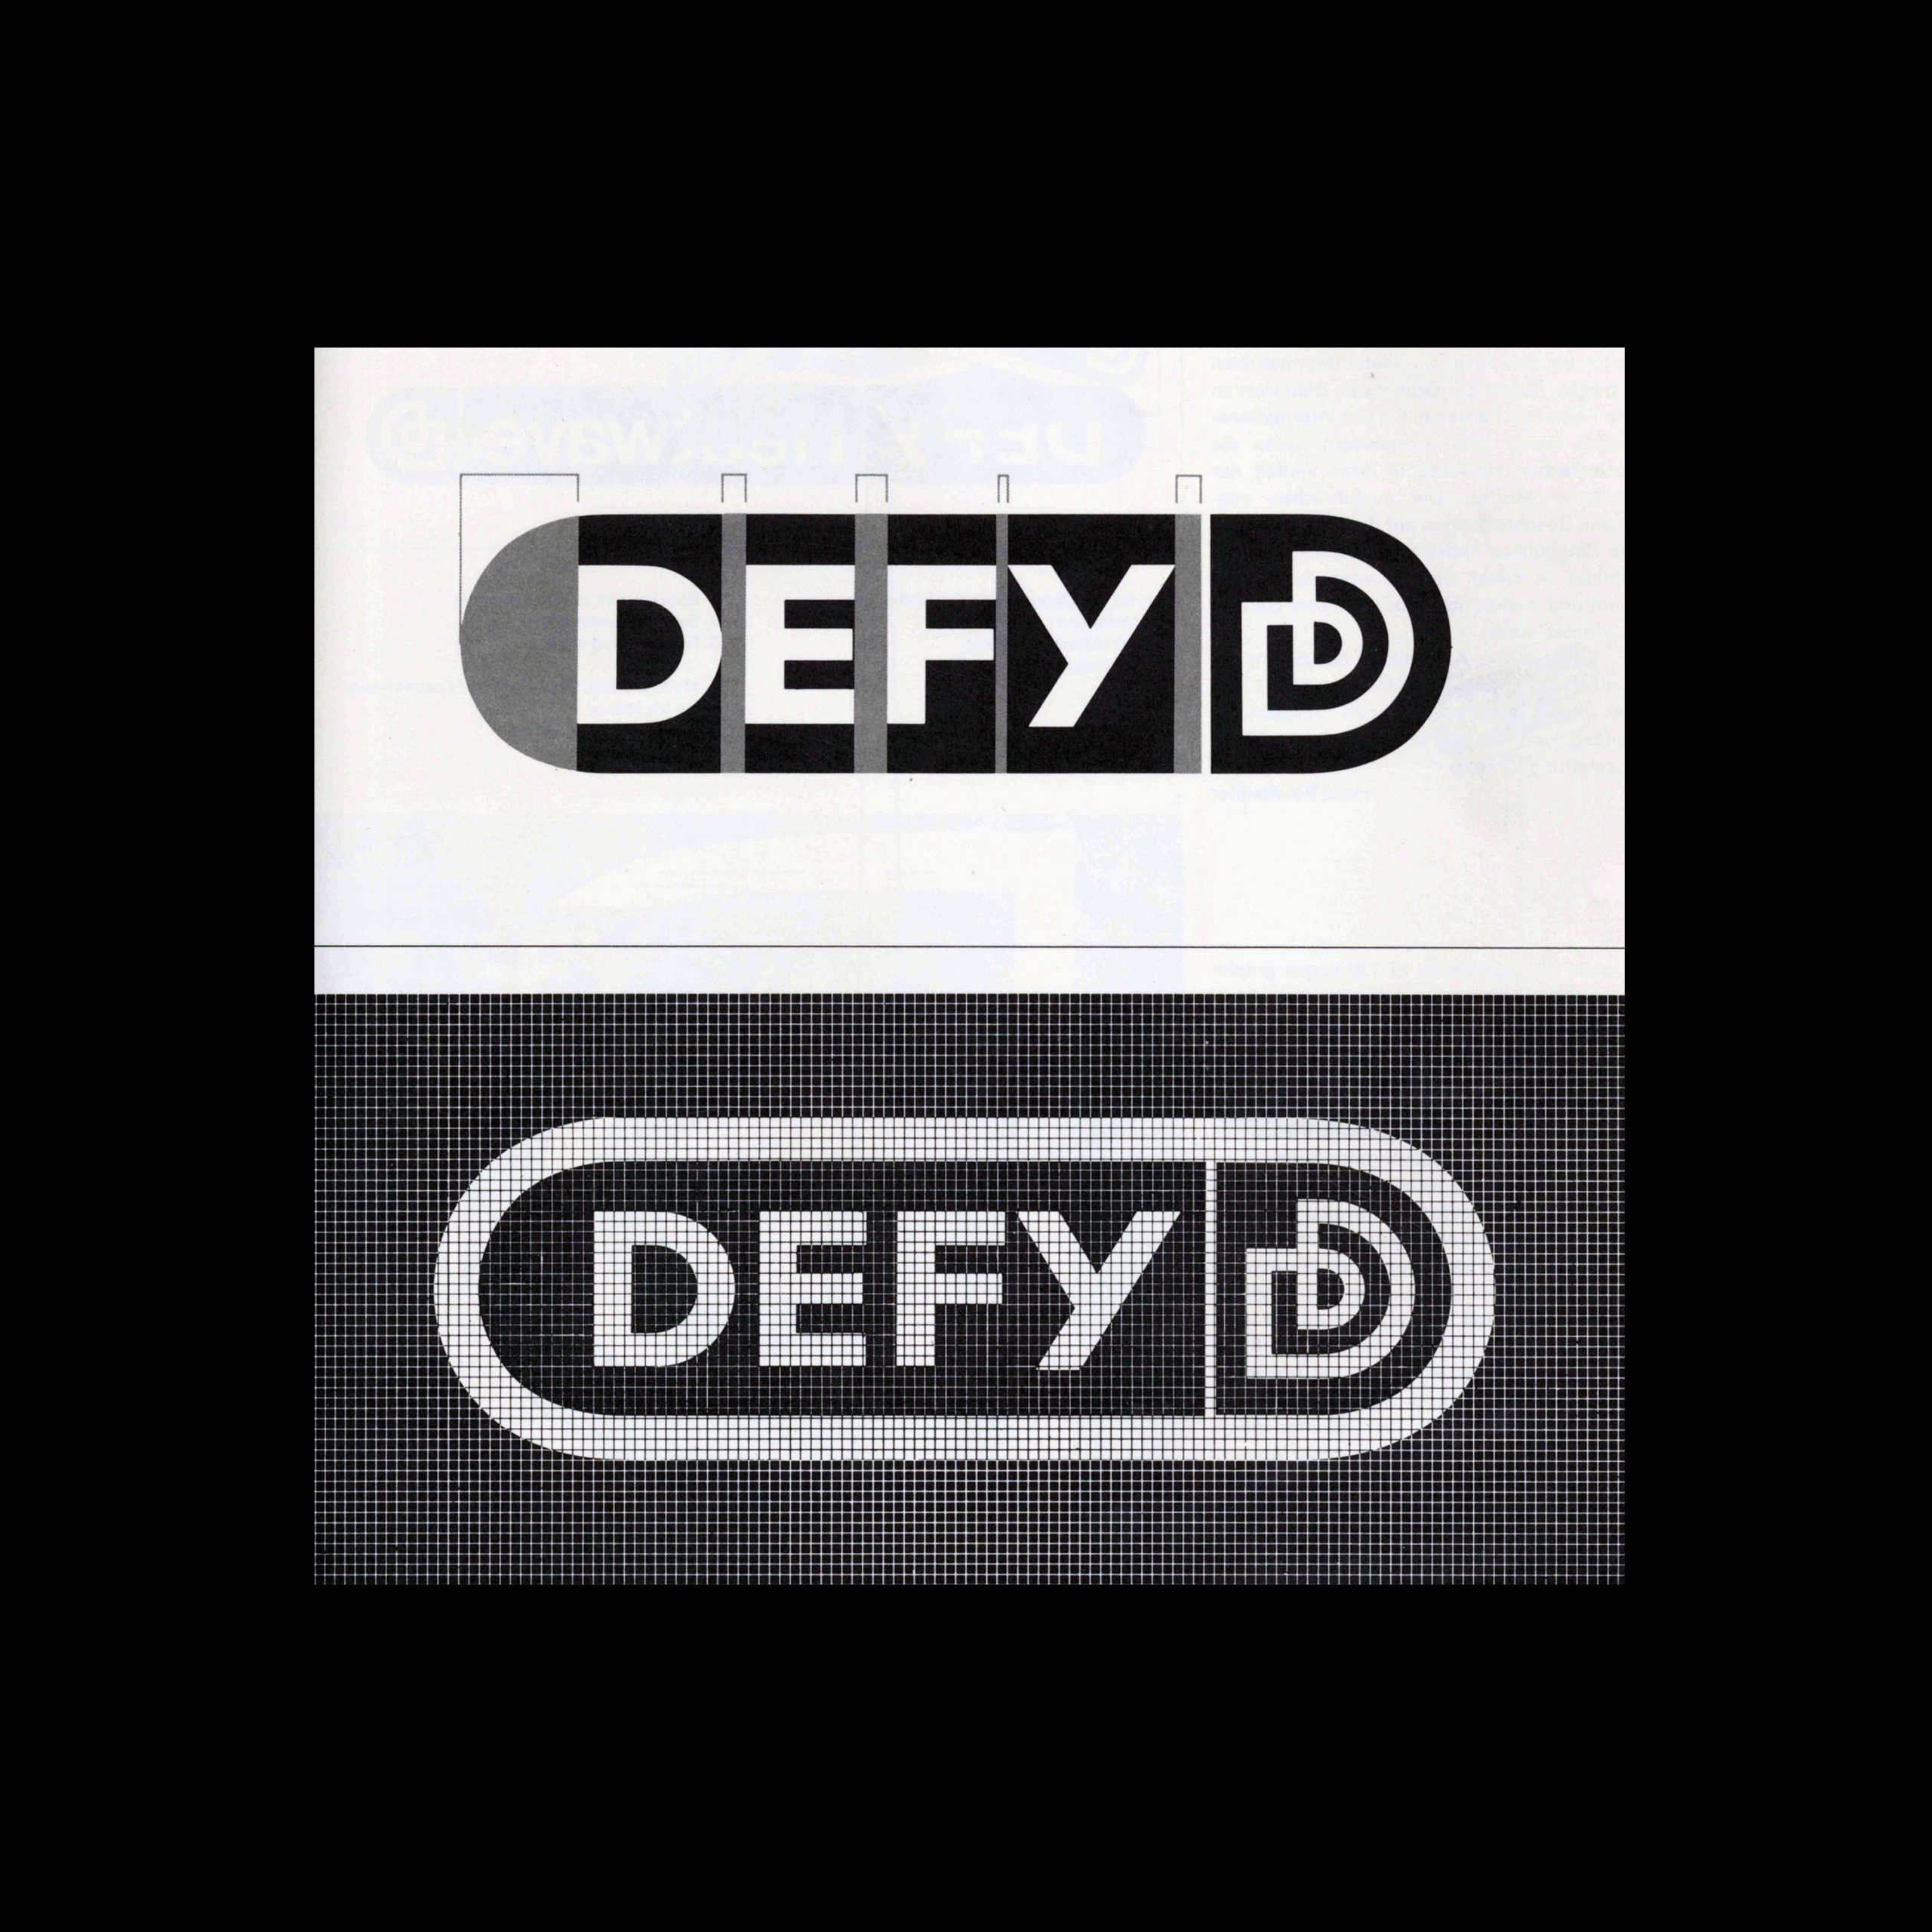 Unimark International and the visual identity of South-African manufacturer, DEFY.